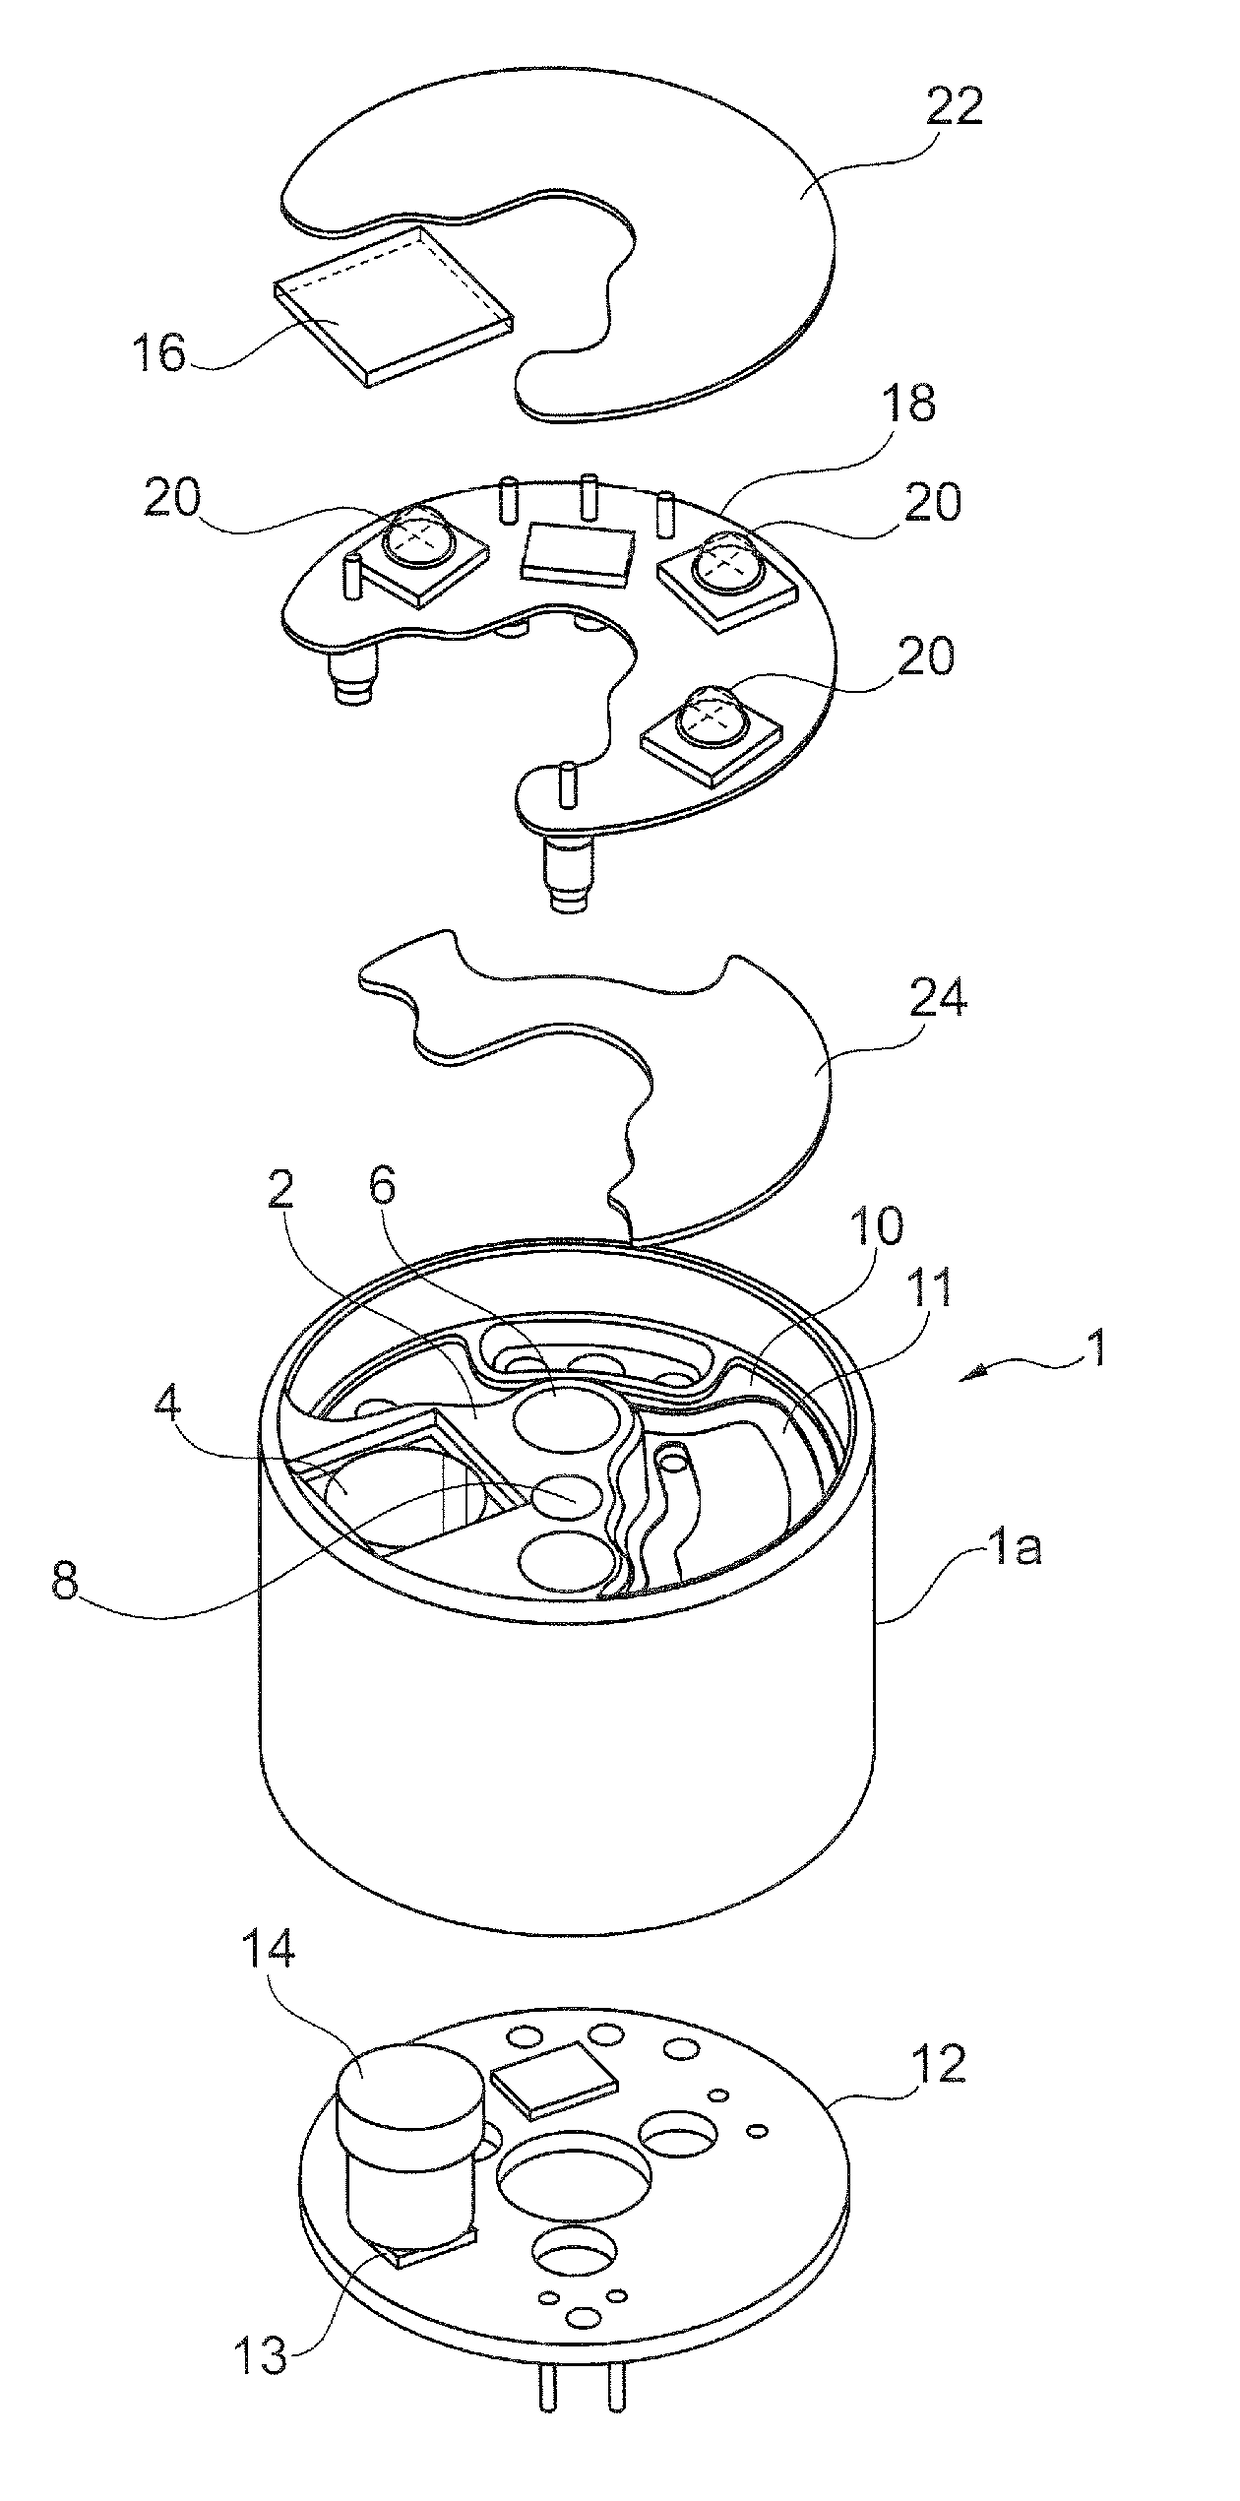 Medical endoscope with a cooling device for mounted electric components